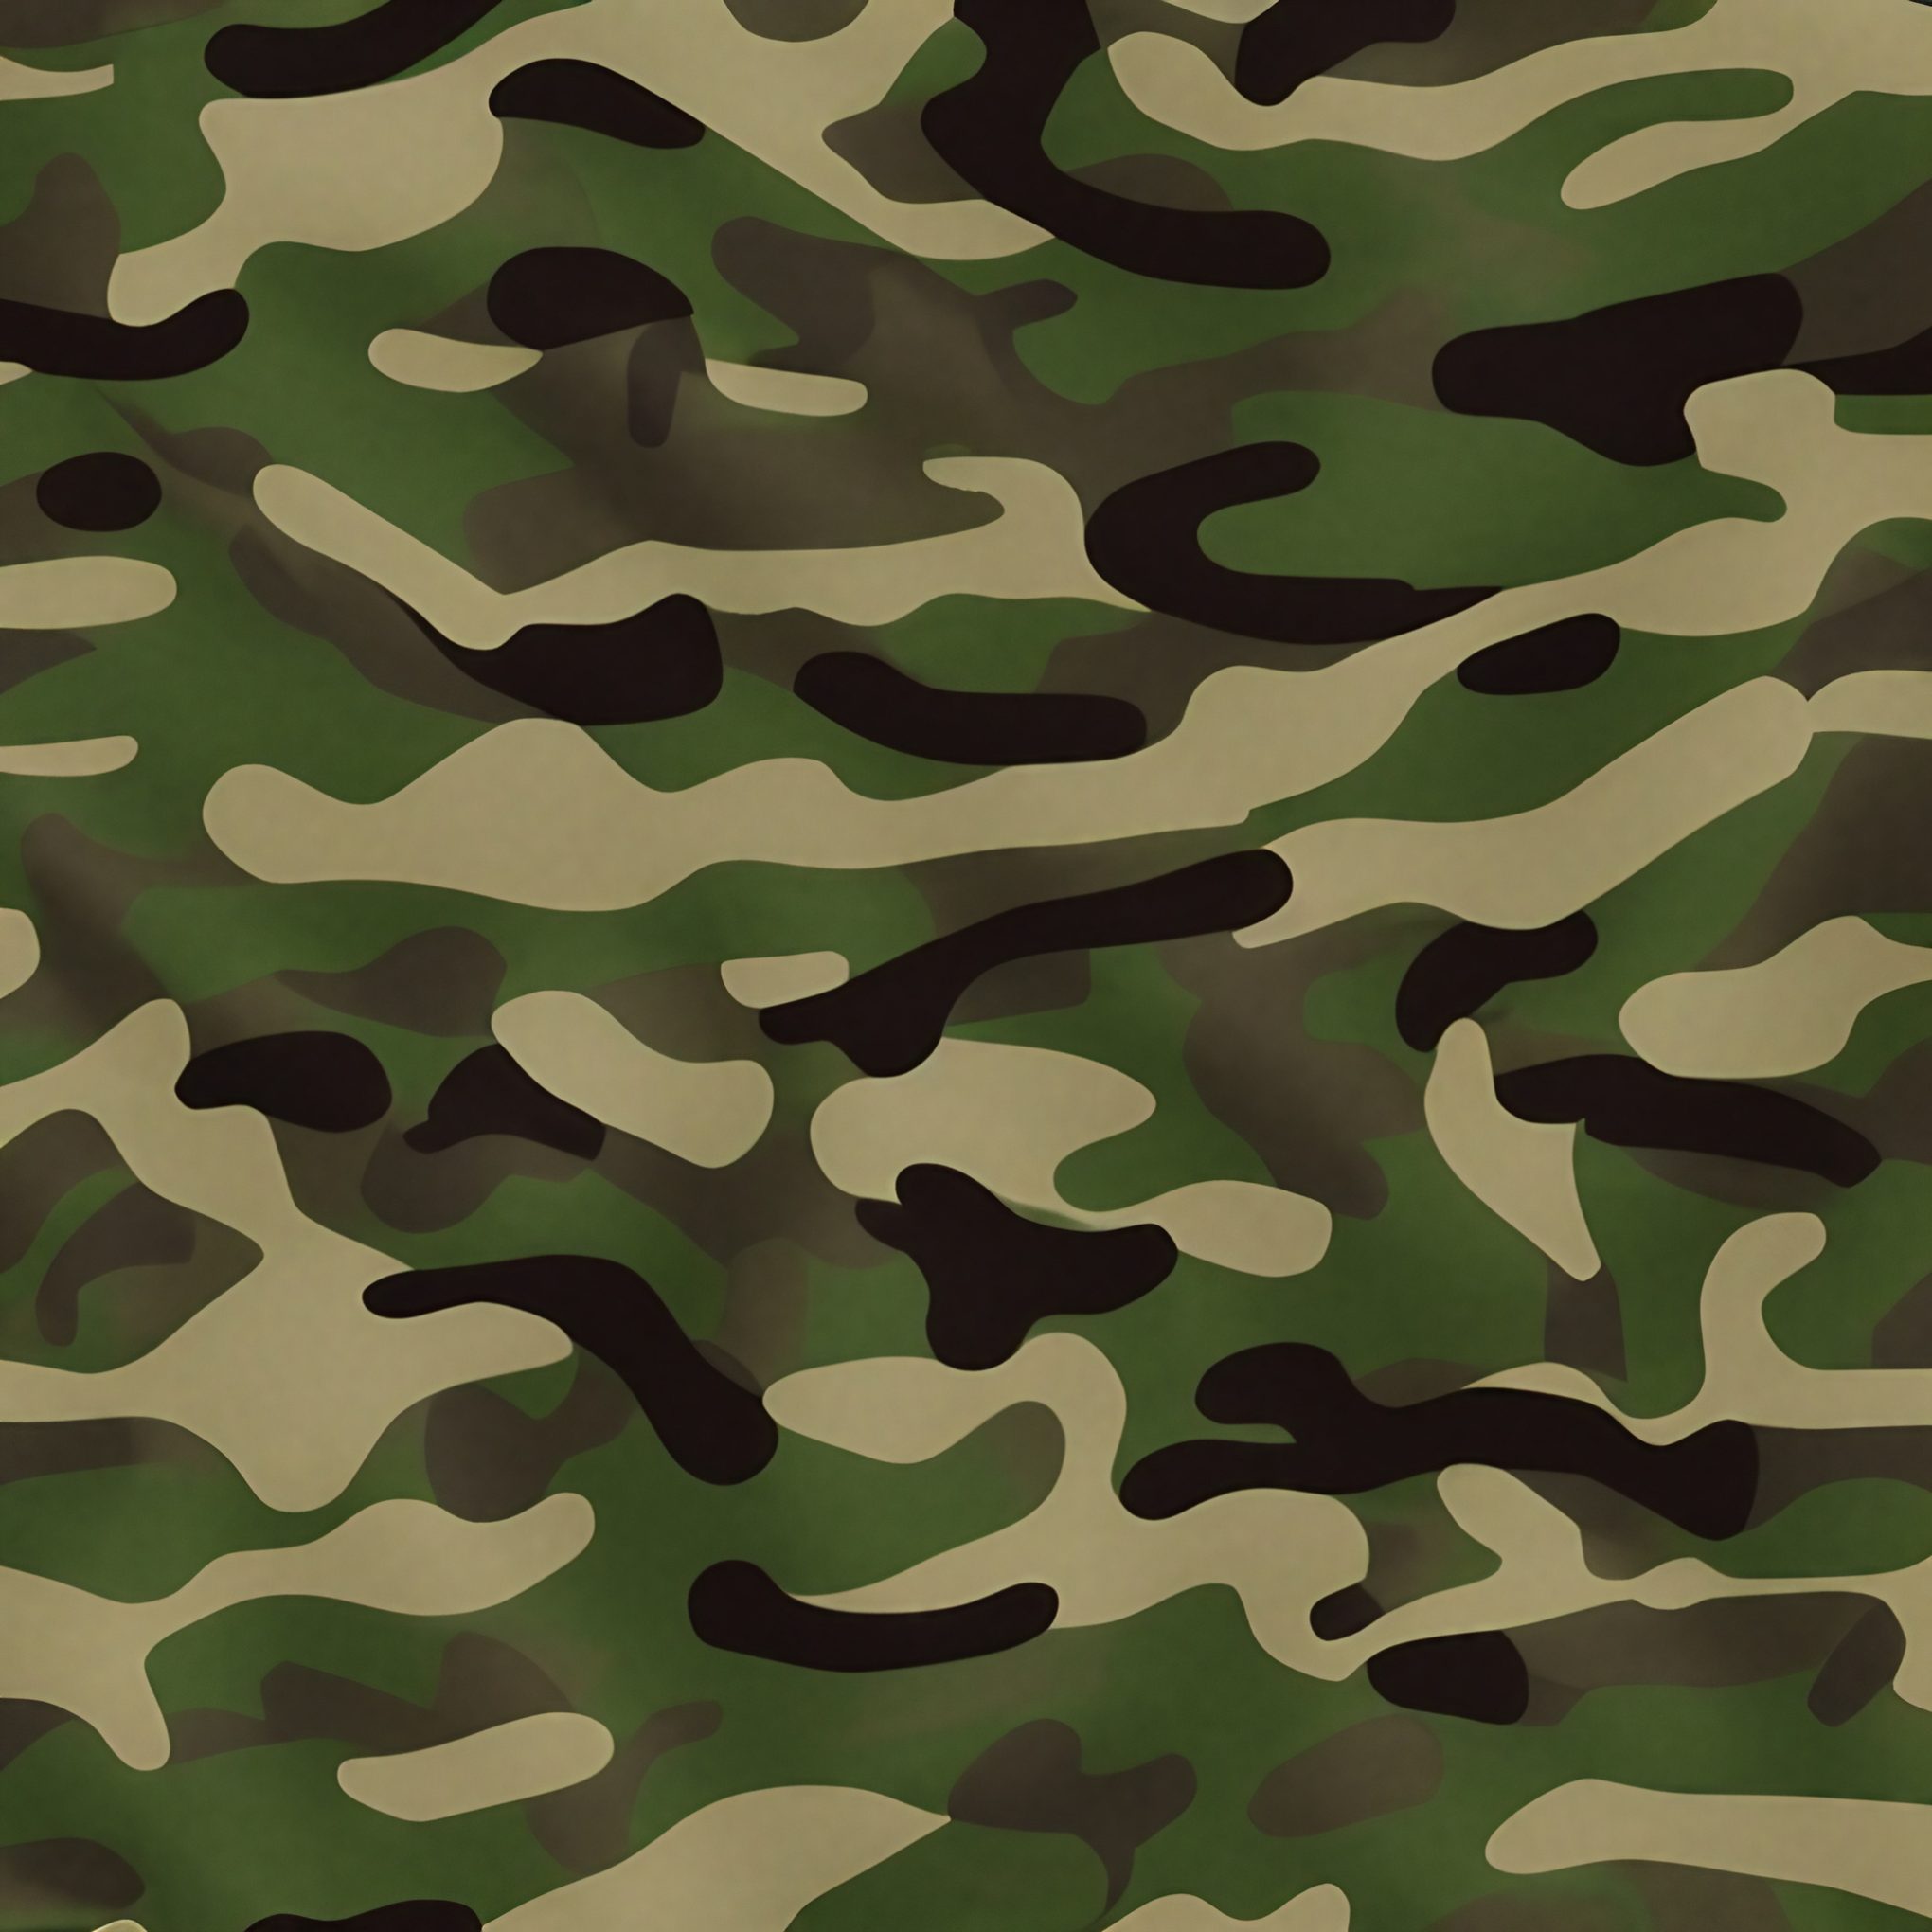 Green Army Camoflage Stock Image Free